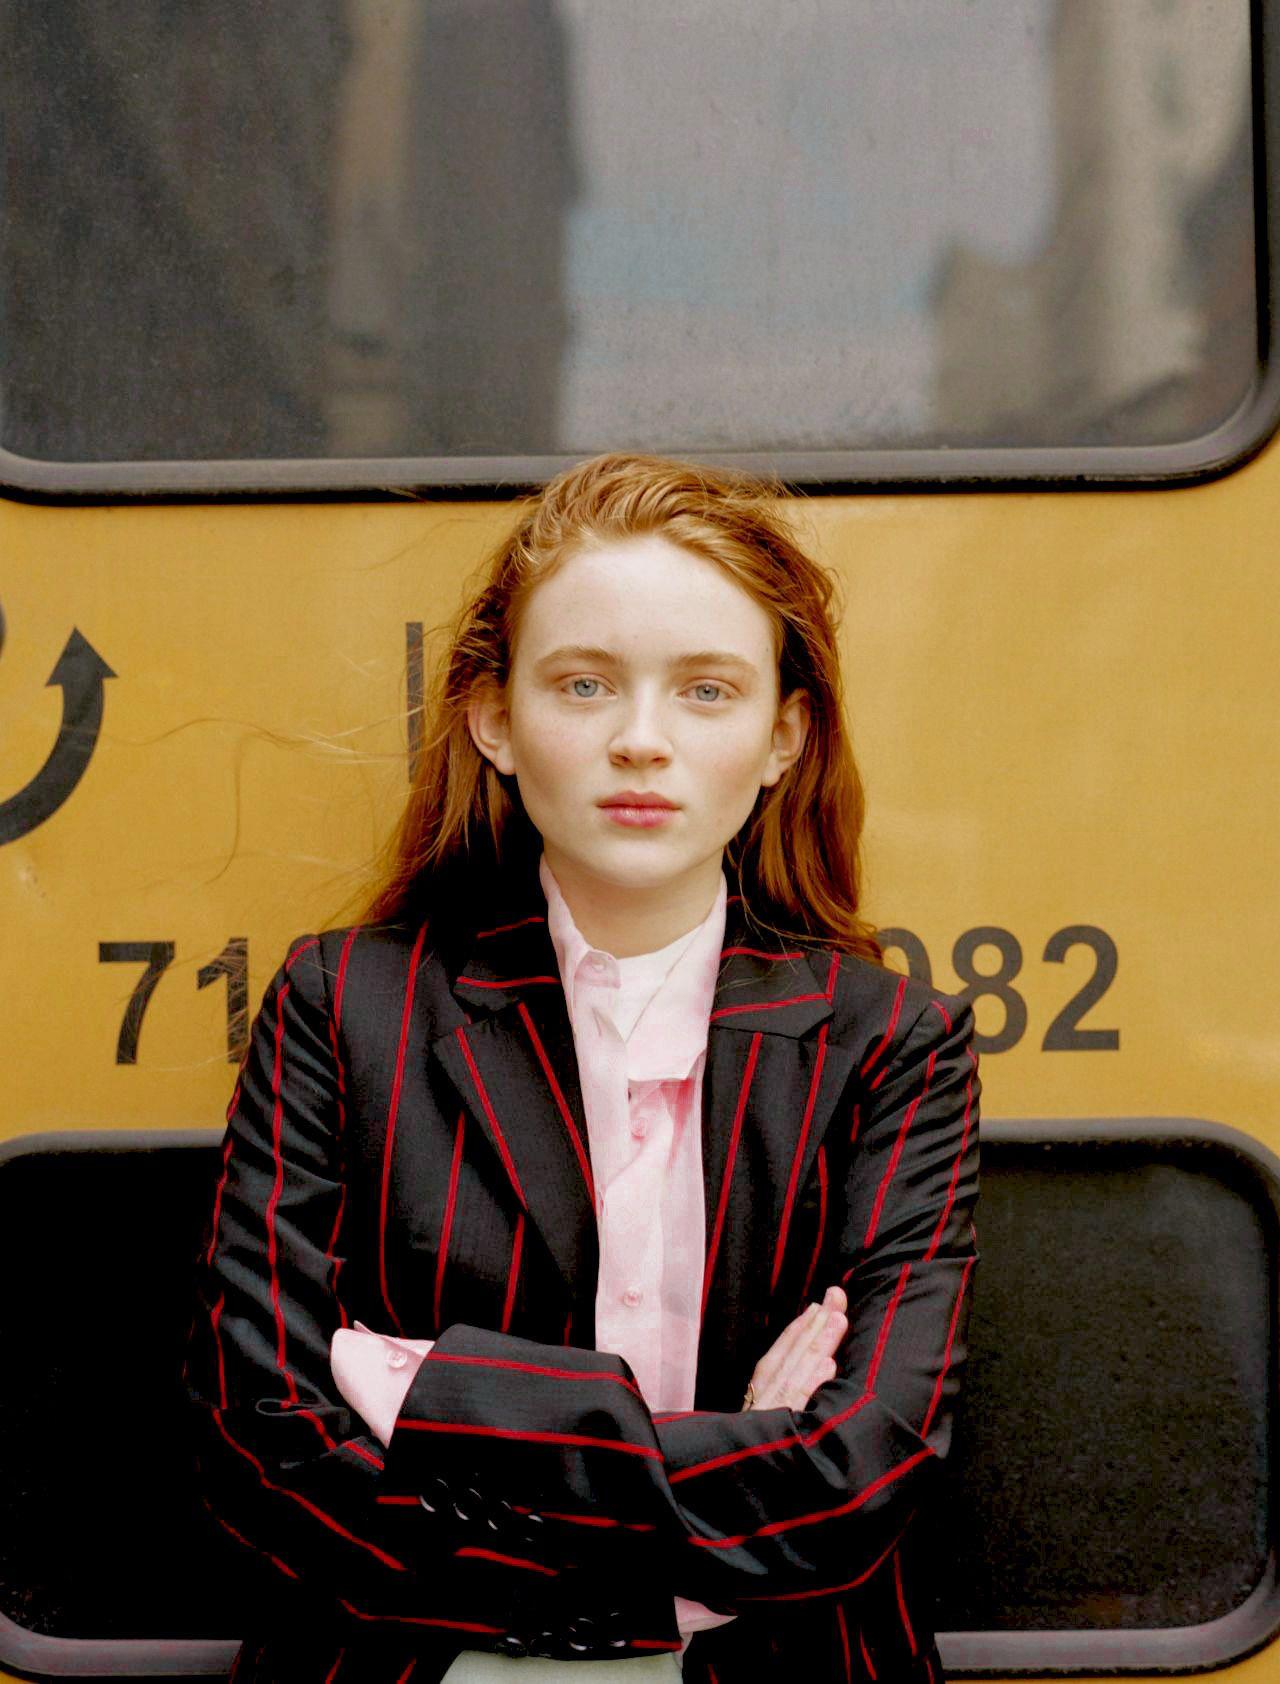 thequeensofbeauty: “Sadie Sink for Interview Magazine, November 2017